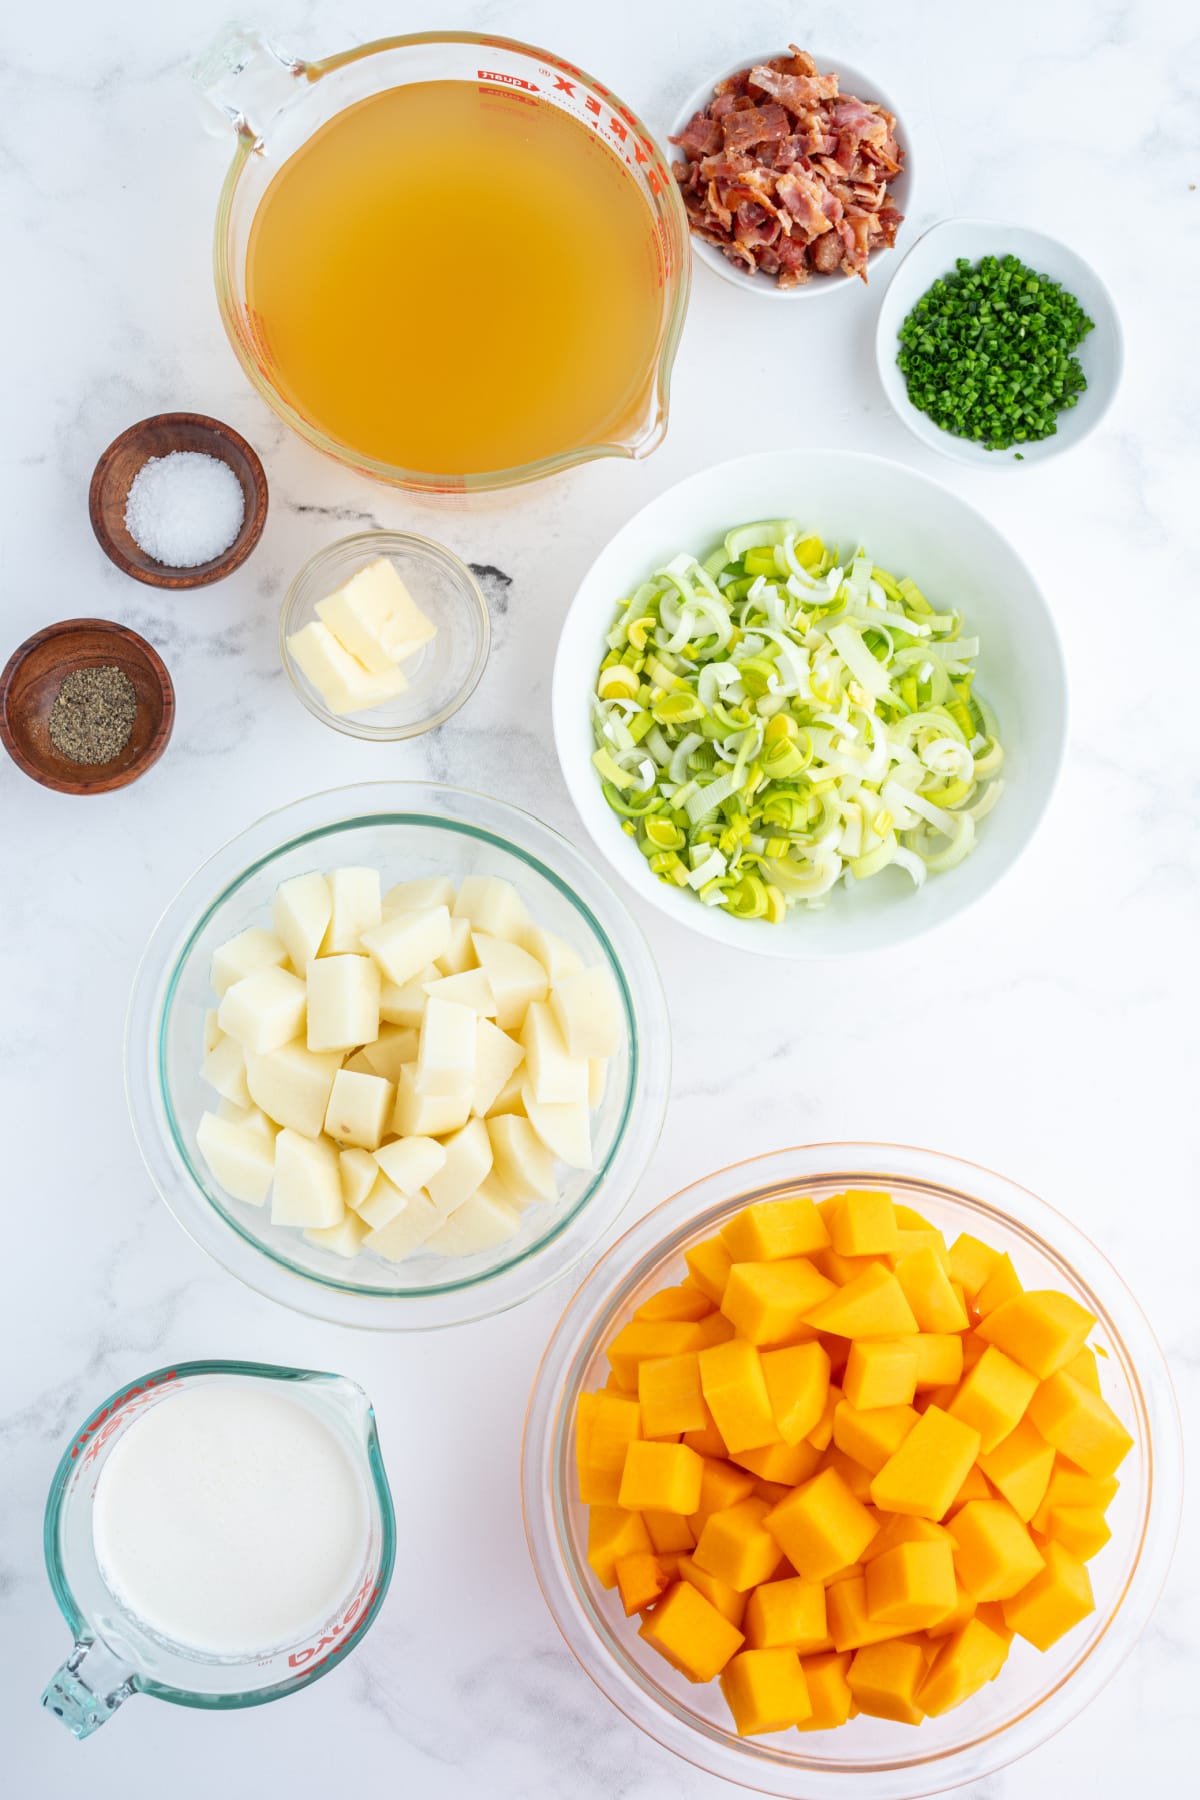 ingredients displayed for making butternut squash and potato soup